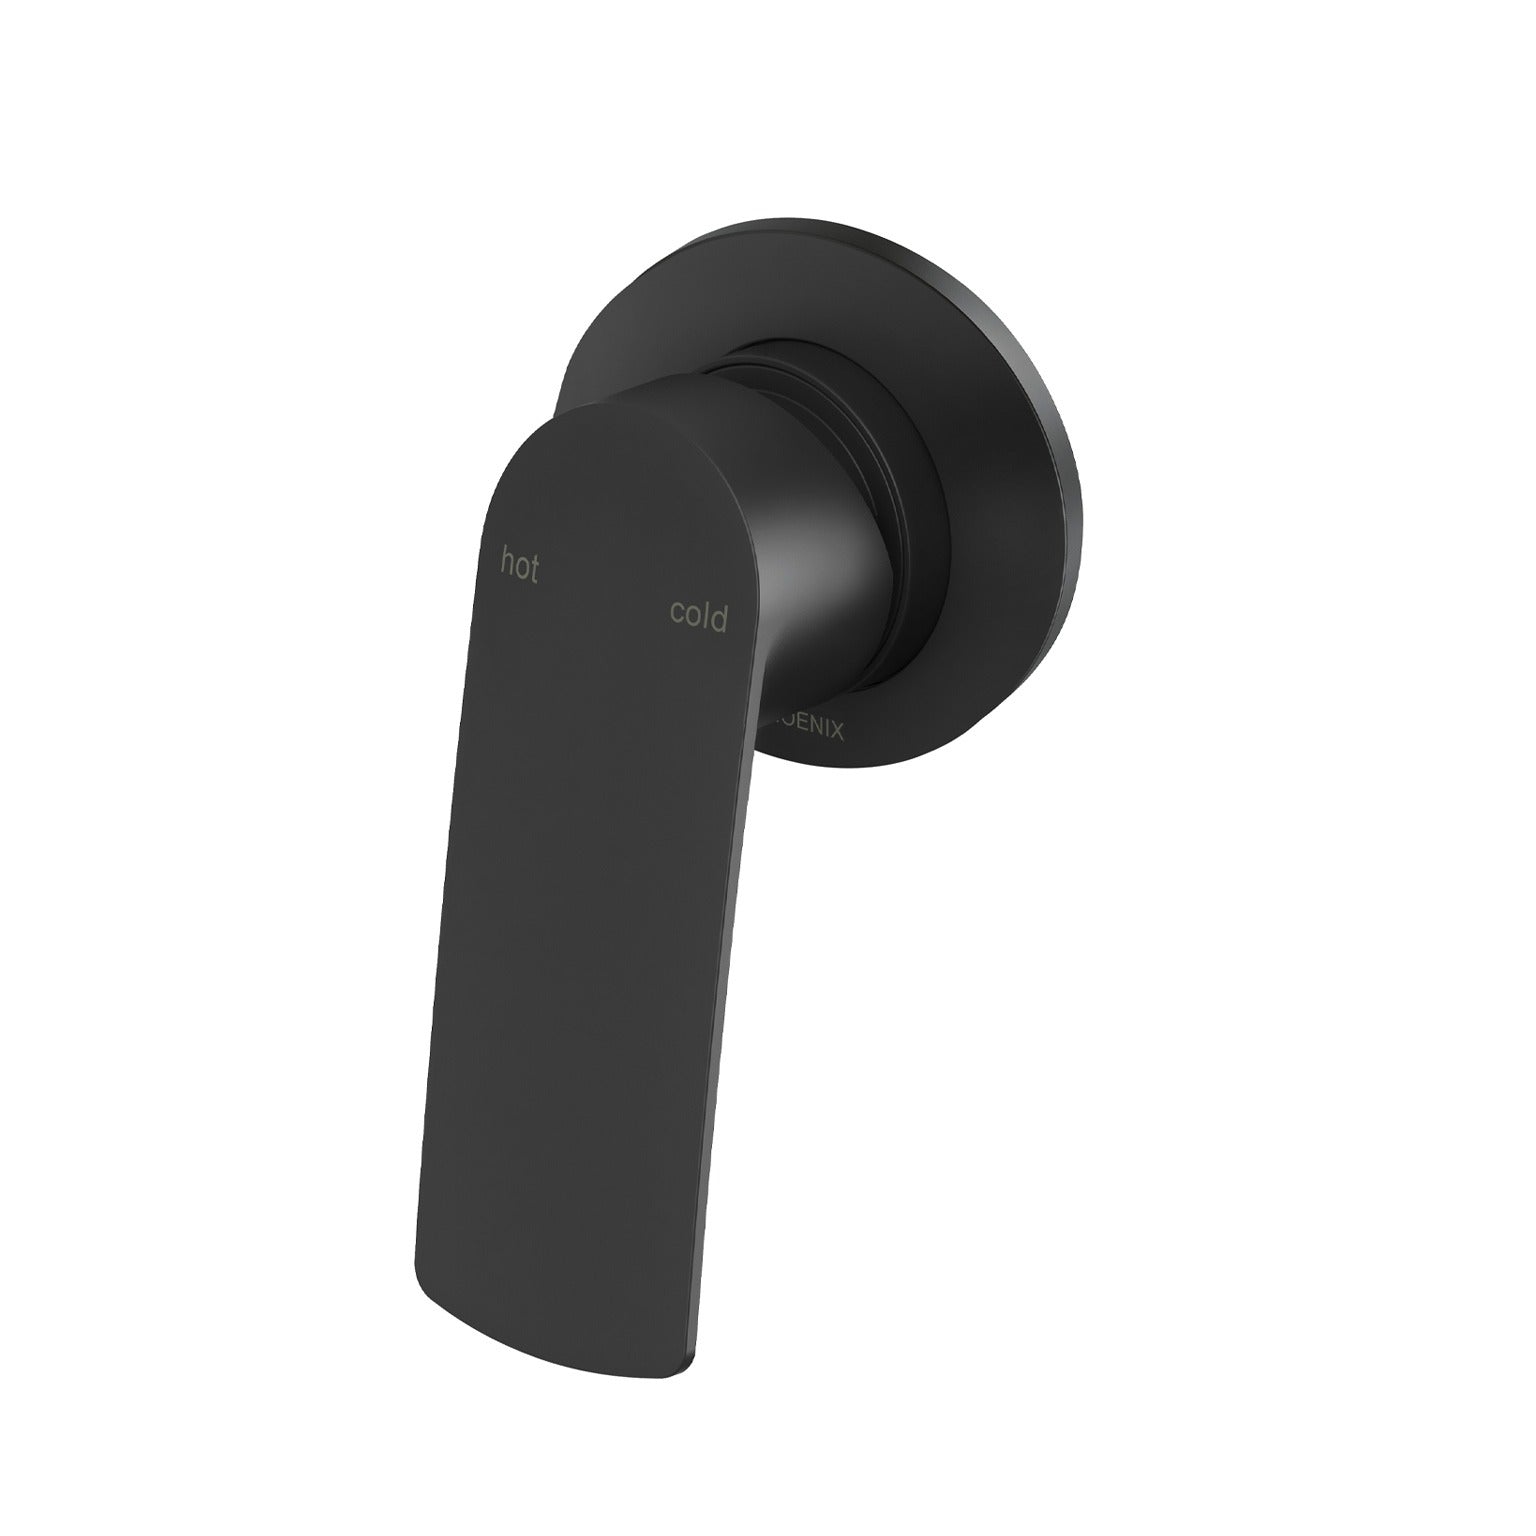 PHOENIX MEKKO SWITCHMIX WALL MIXER W/ ROUND BACKPLATE FIT-OFF AND ROUGH-IN KIT MATTE BLACK